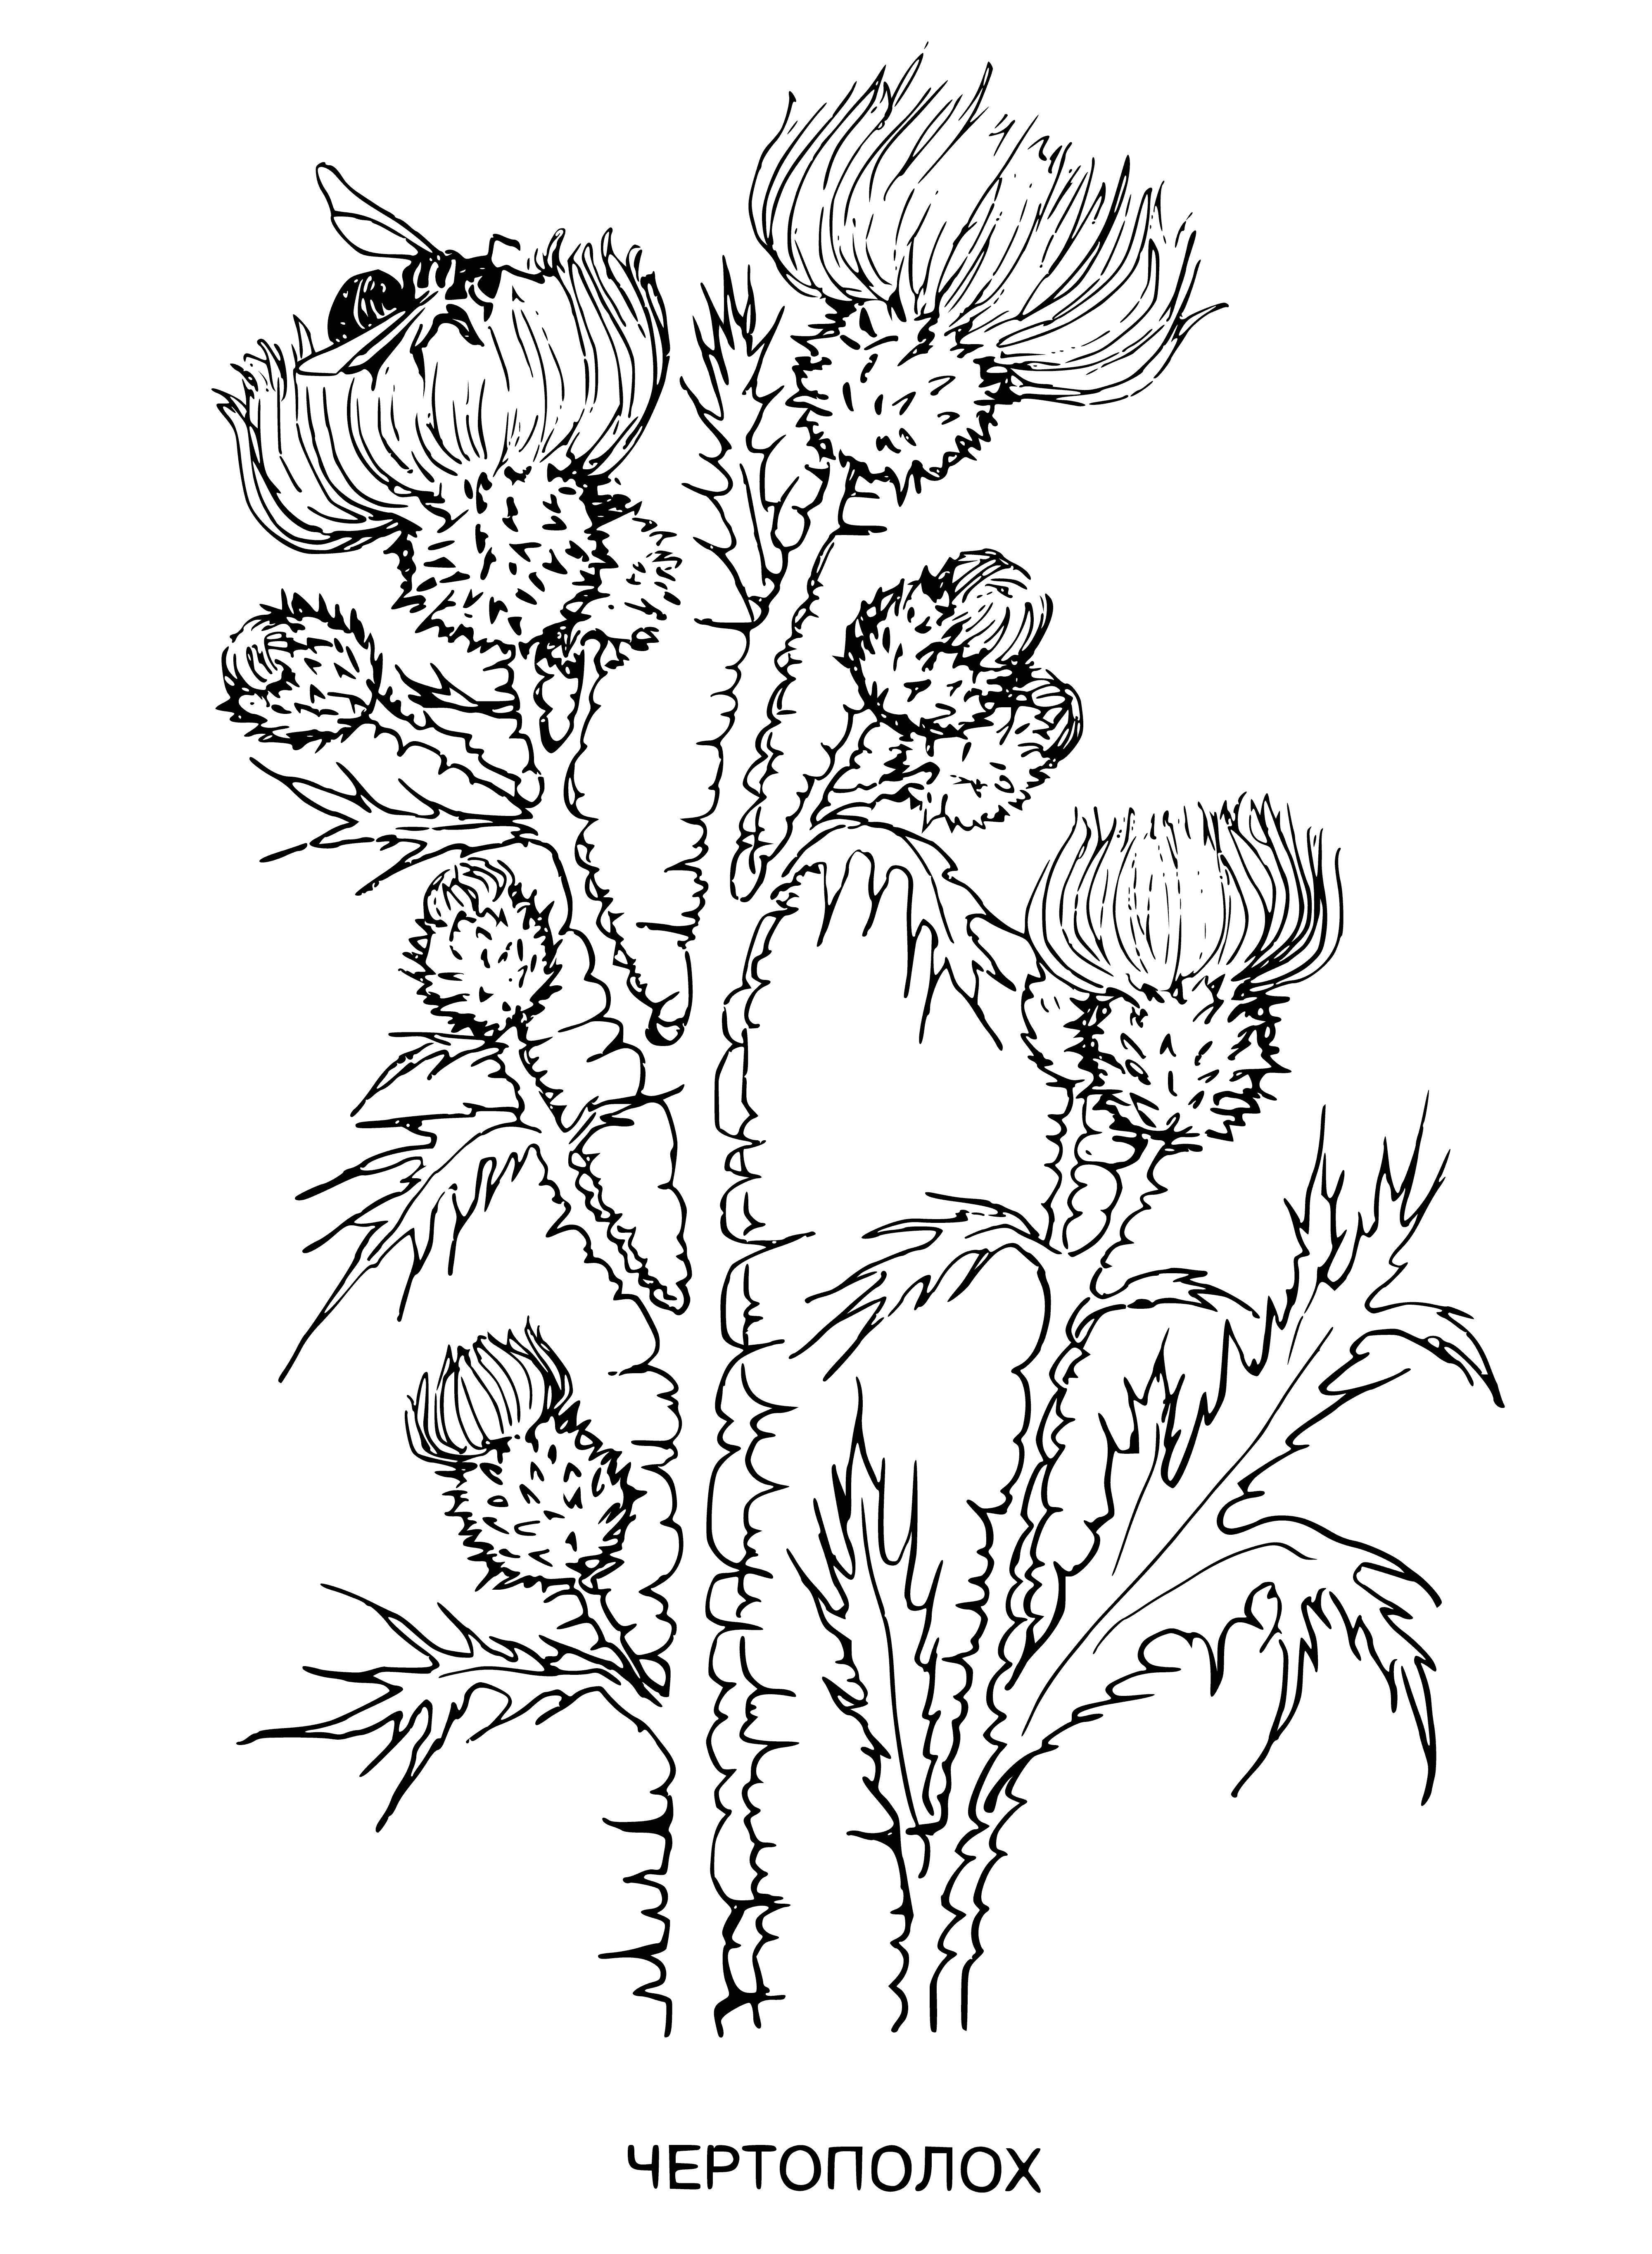 Thistle coloring page